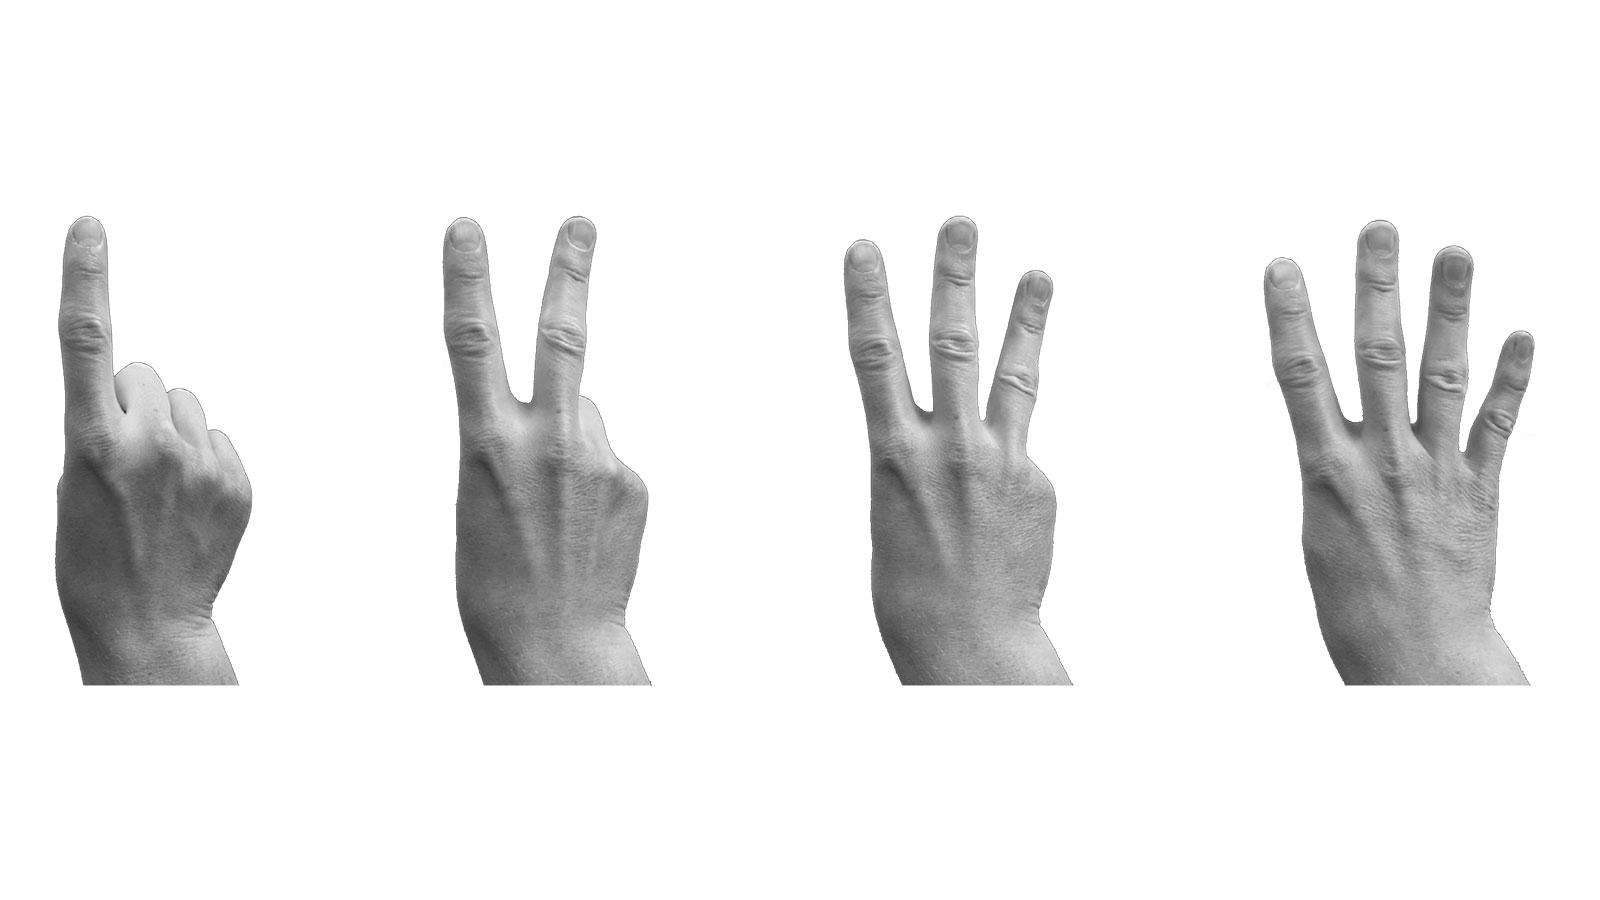 Finger poses for automotive interactions